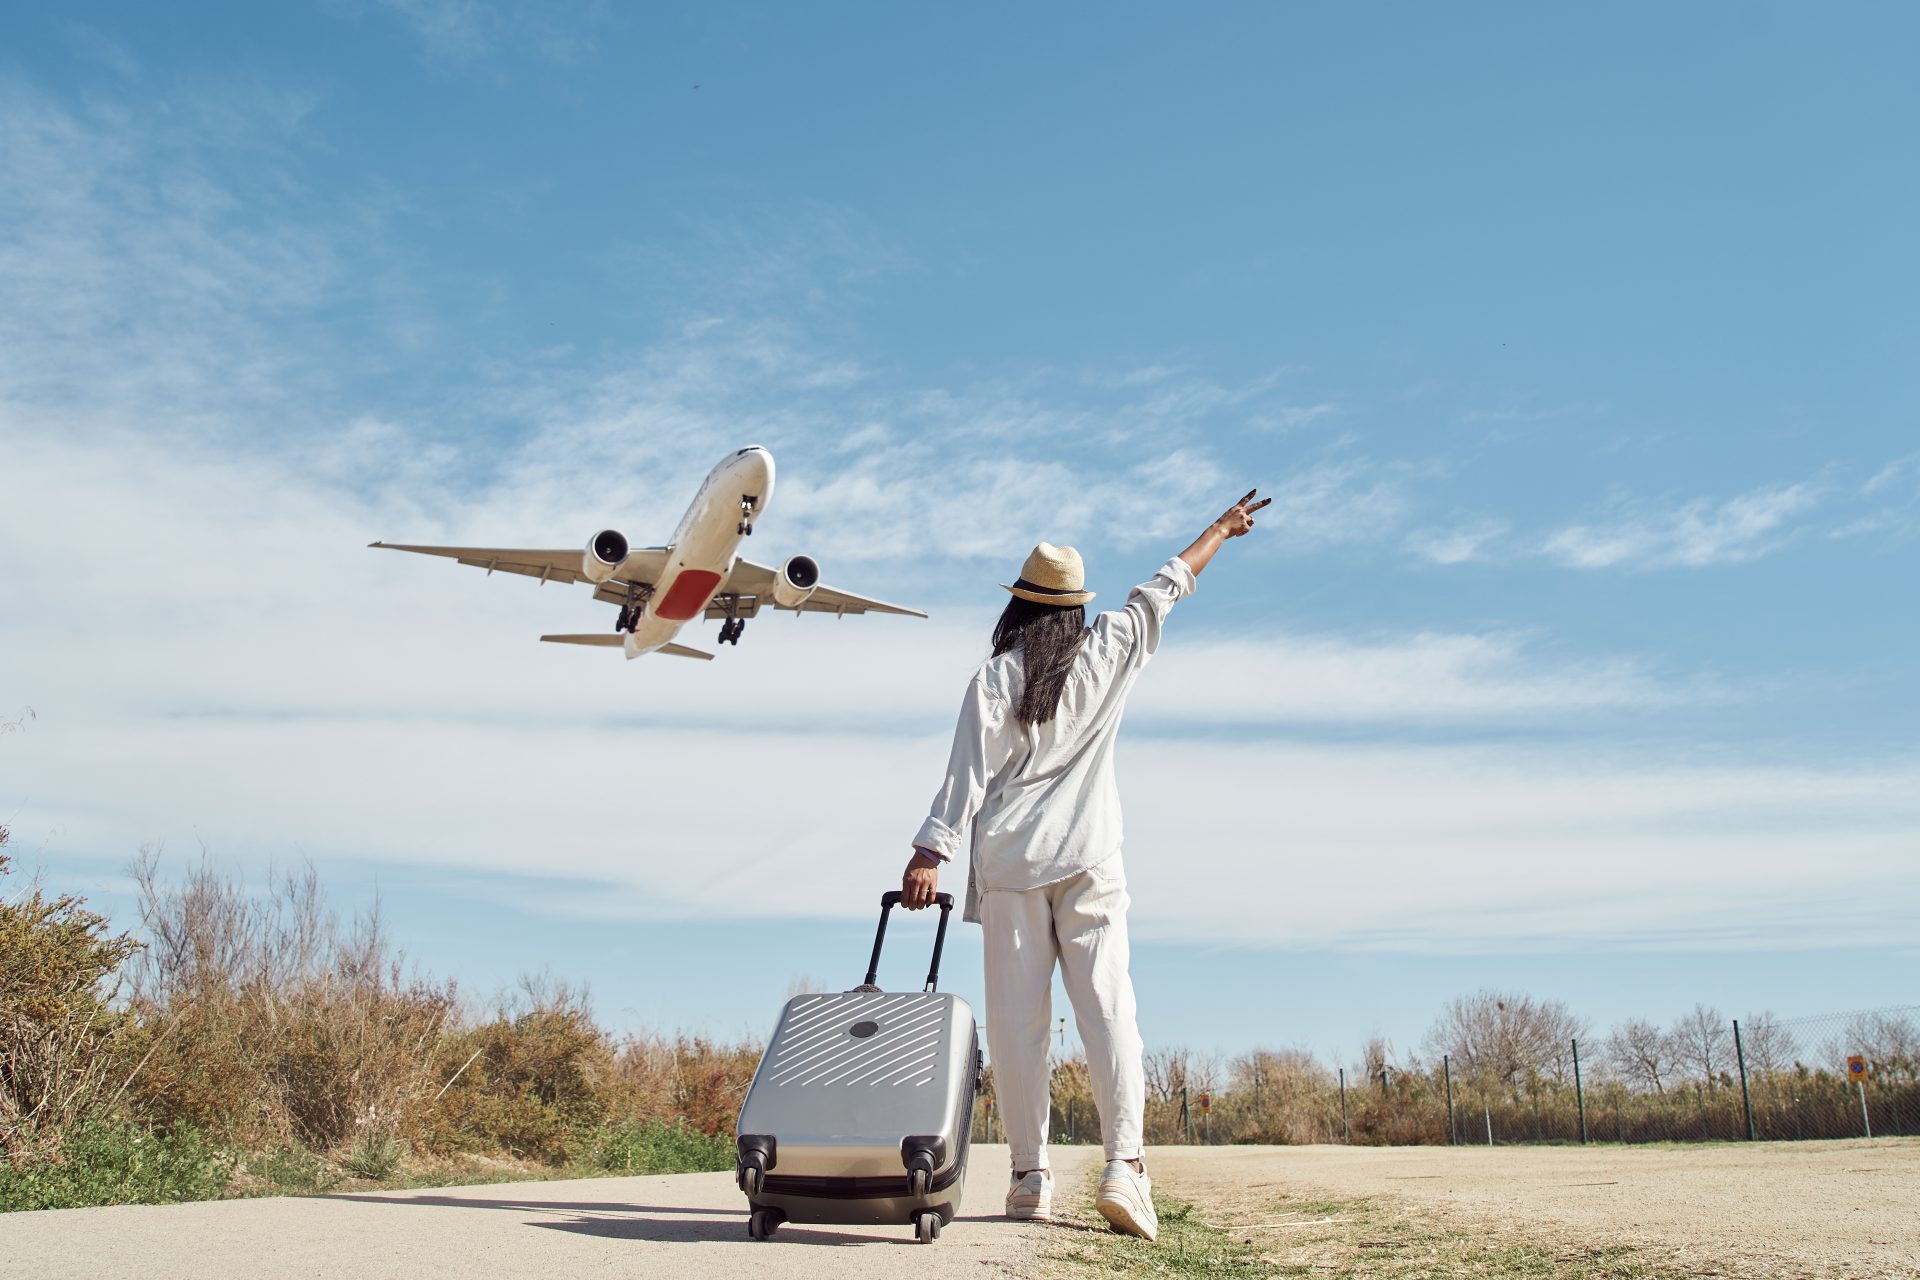 <p><span>The cost of flights has been skyrocketing since the end of the pandemic but that hasn’t really been stopping anyone from booking their next vacation. Yet the price of your ticket isn’t the only thing you should be considering when you travel this year…</span></p>